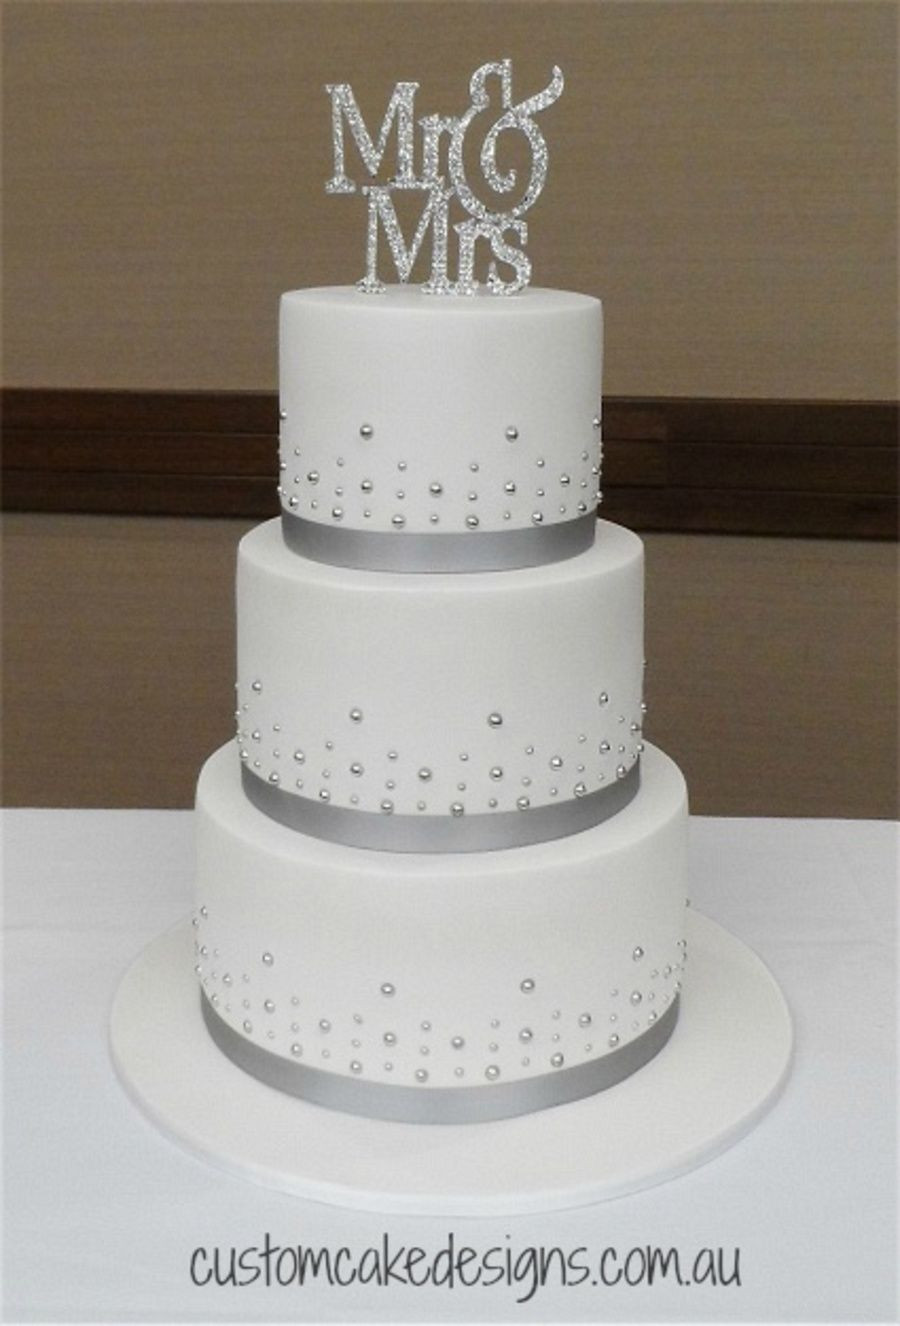 Simple Wedding Cakes Pinterest
 This elegant and simple design was chosen by the bride